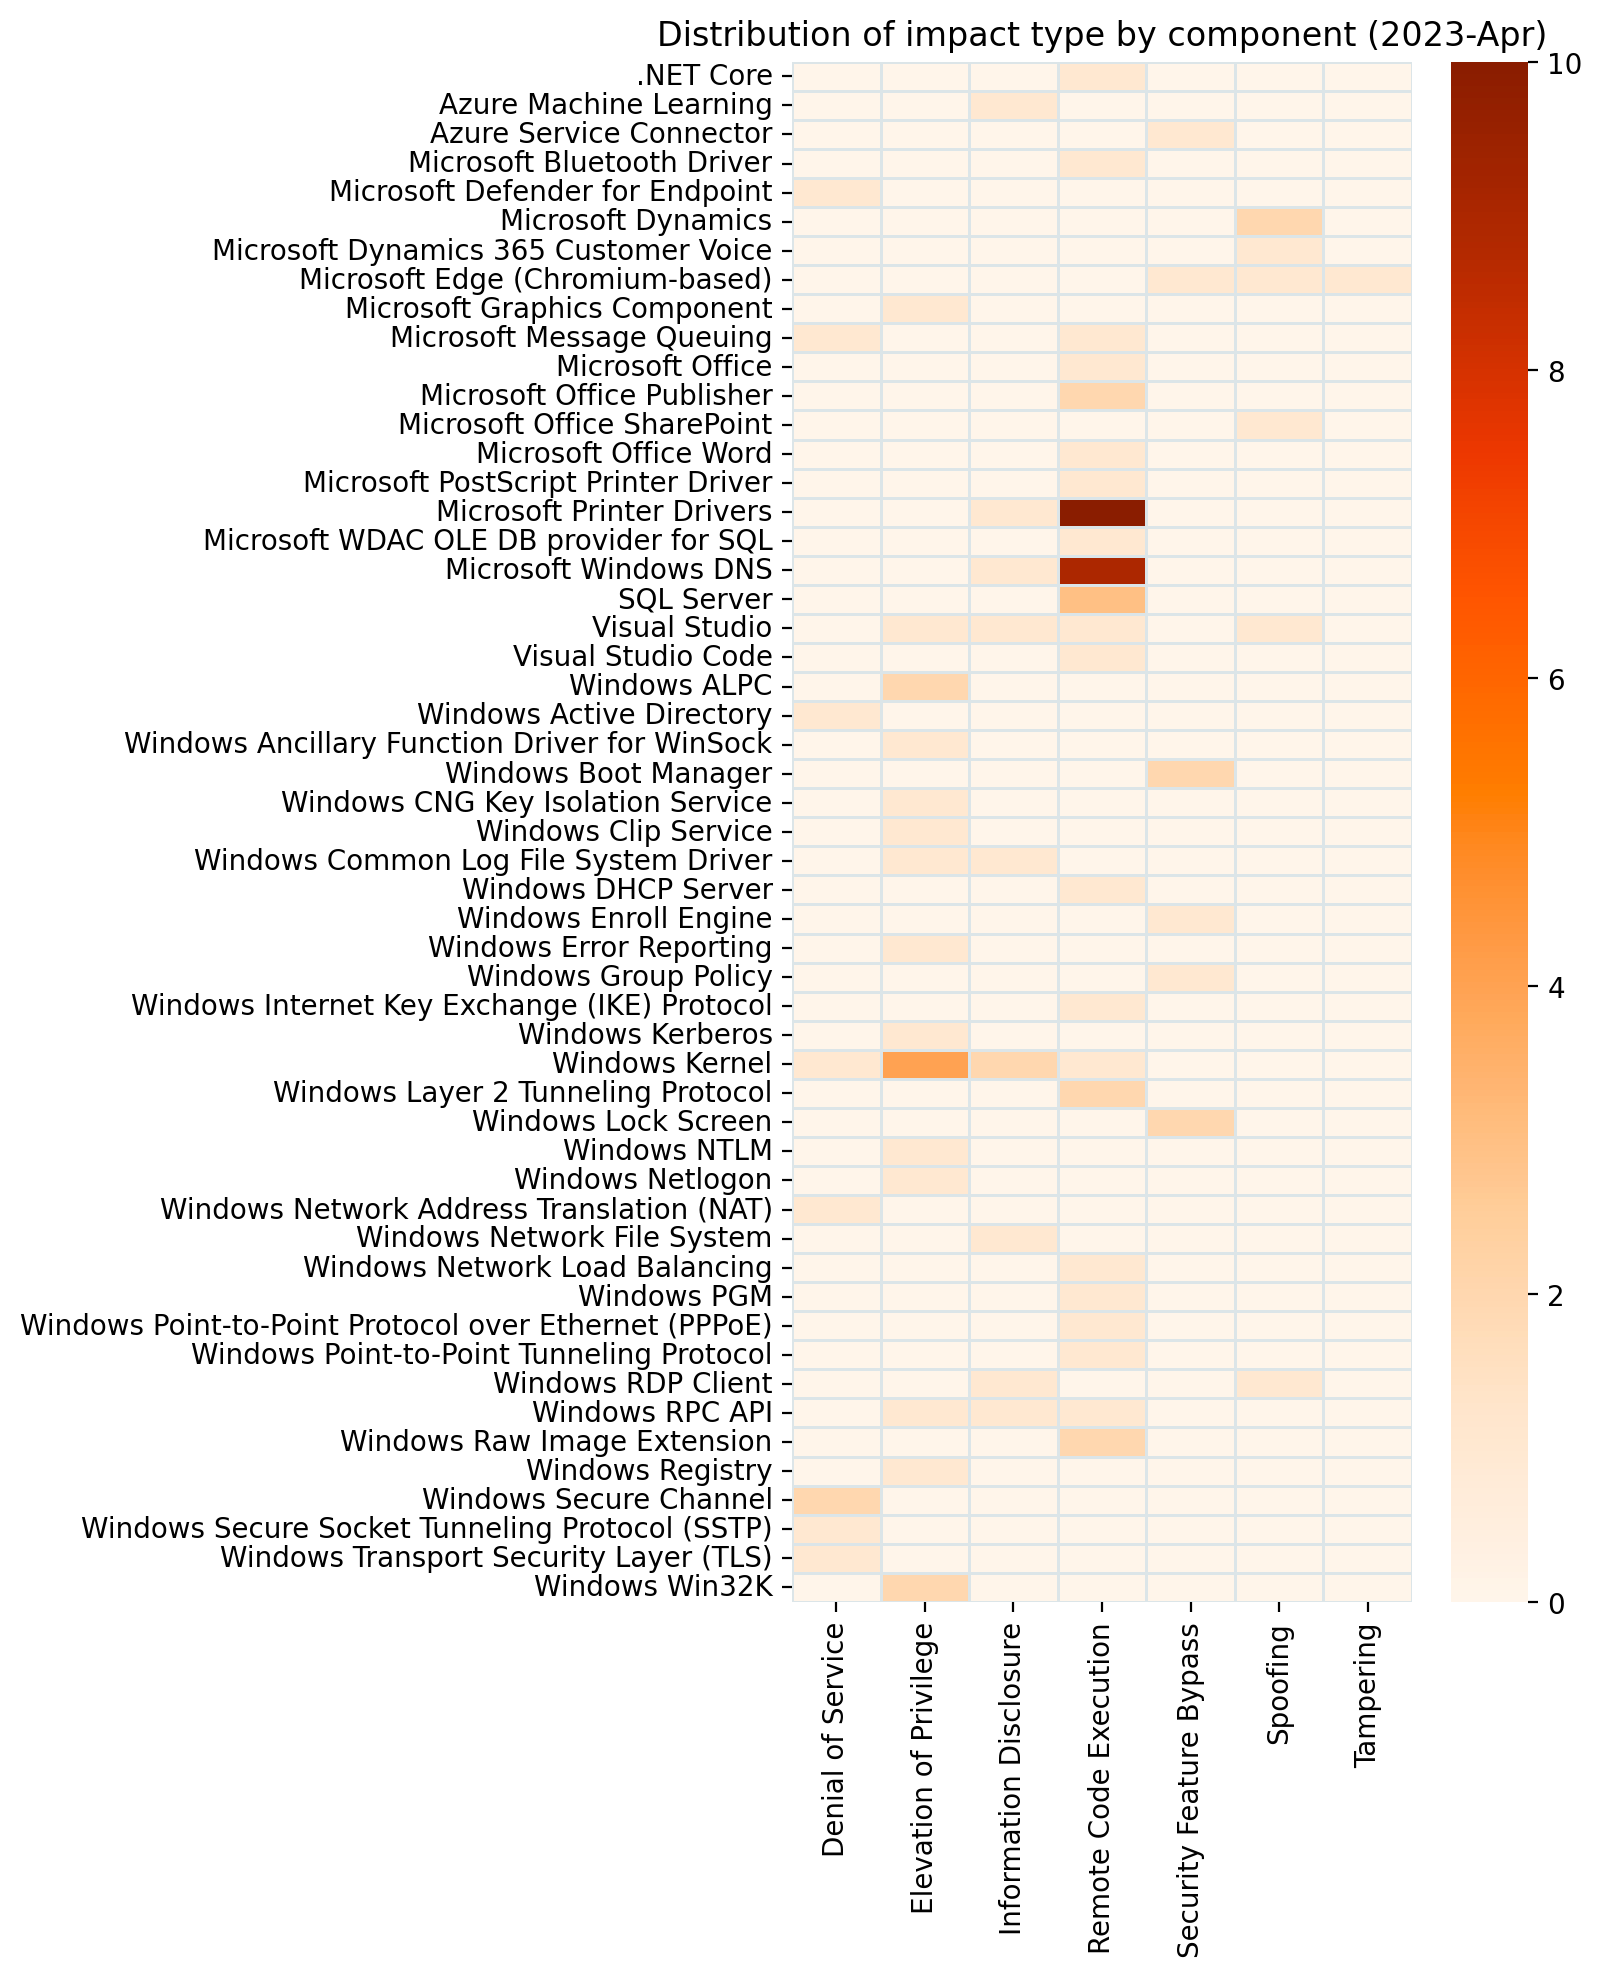  A heatmap showing vulnerability count by component and impact for Microsoft Path Tuesday April 2023. Printer drivers, Microsoft Windows DNS, and the Windows Kernel stand out from the pack.